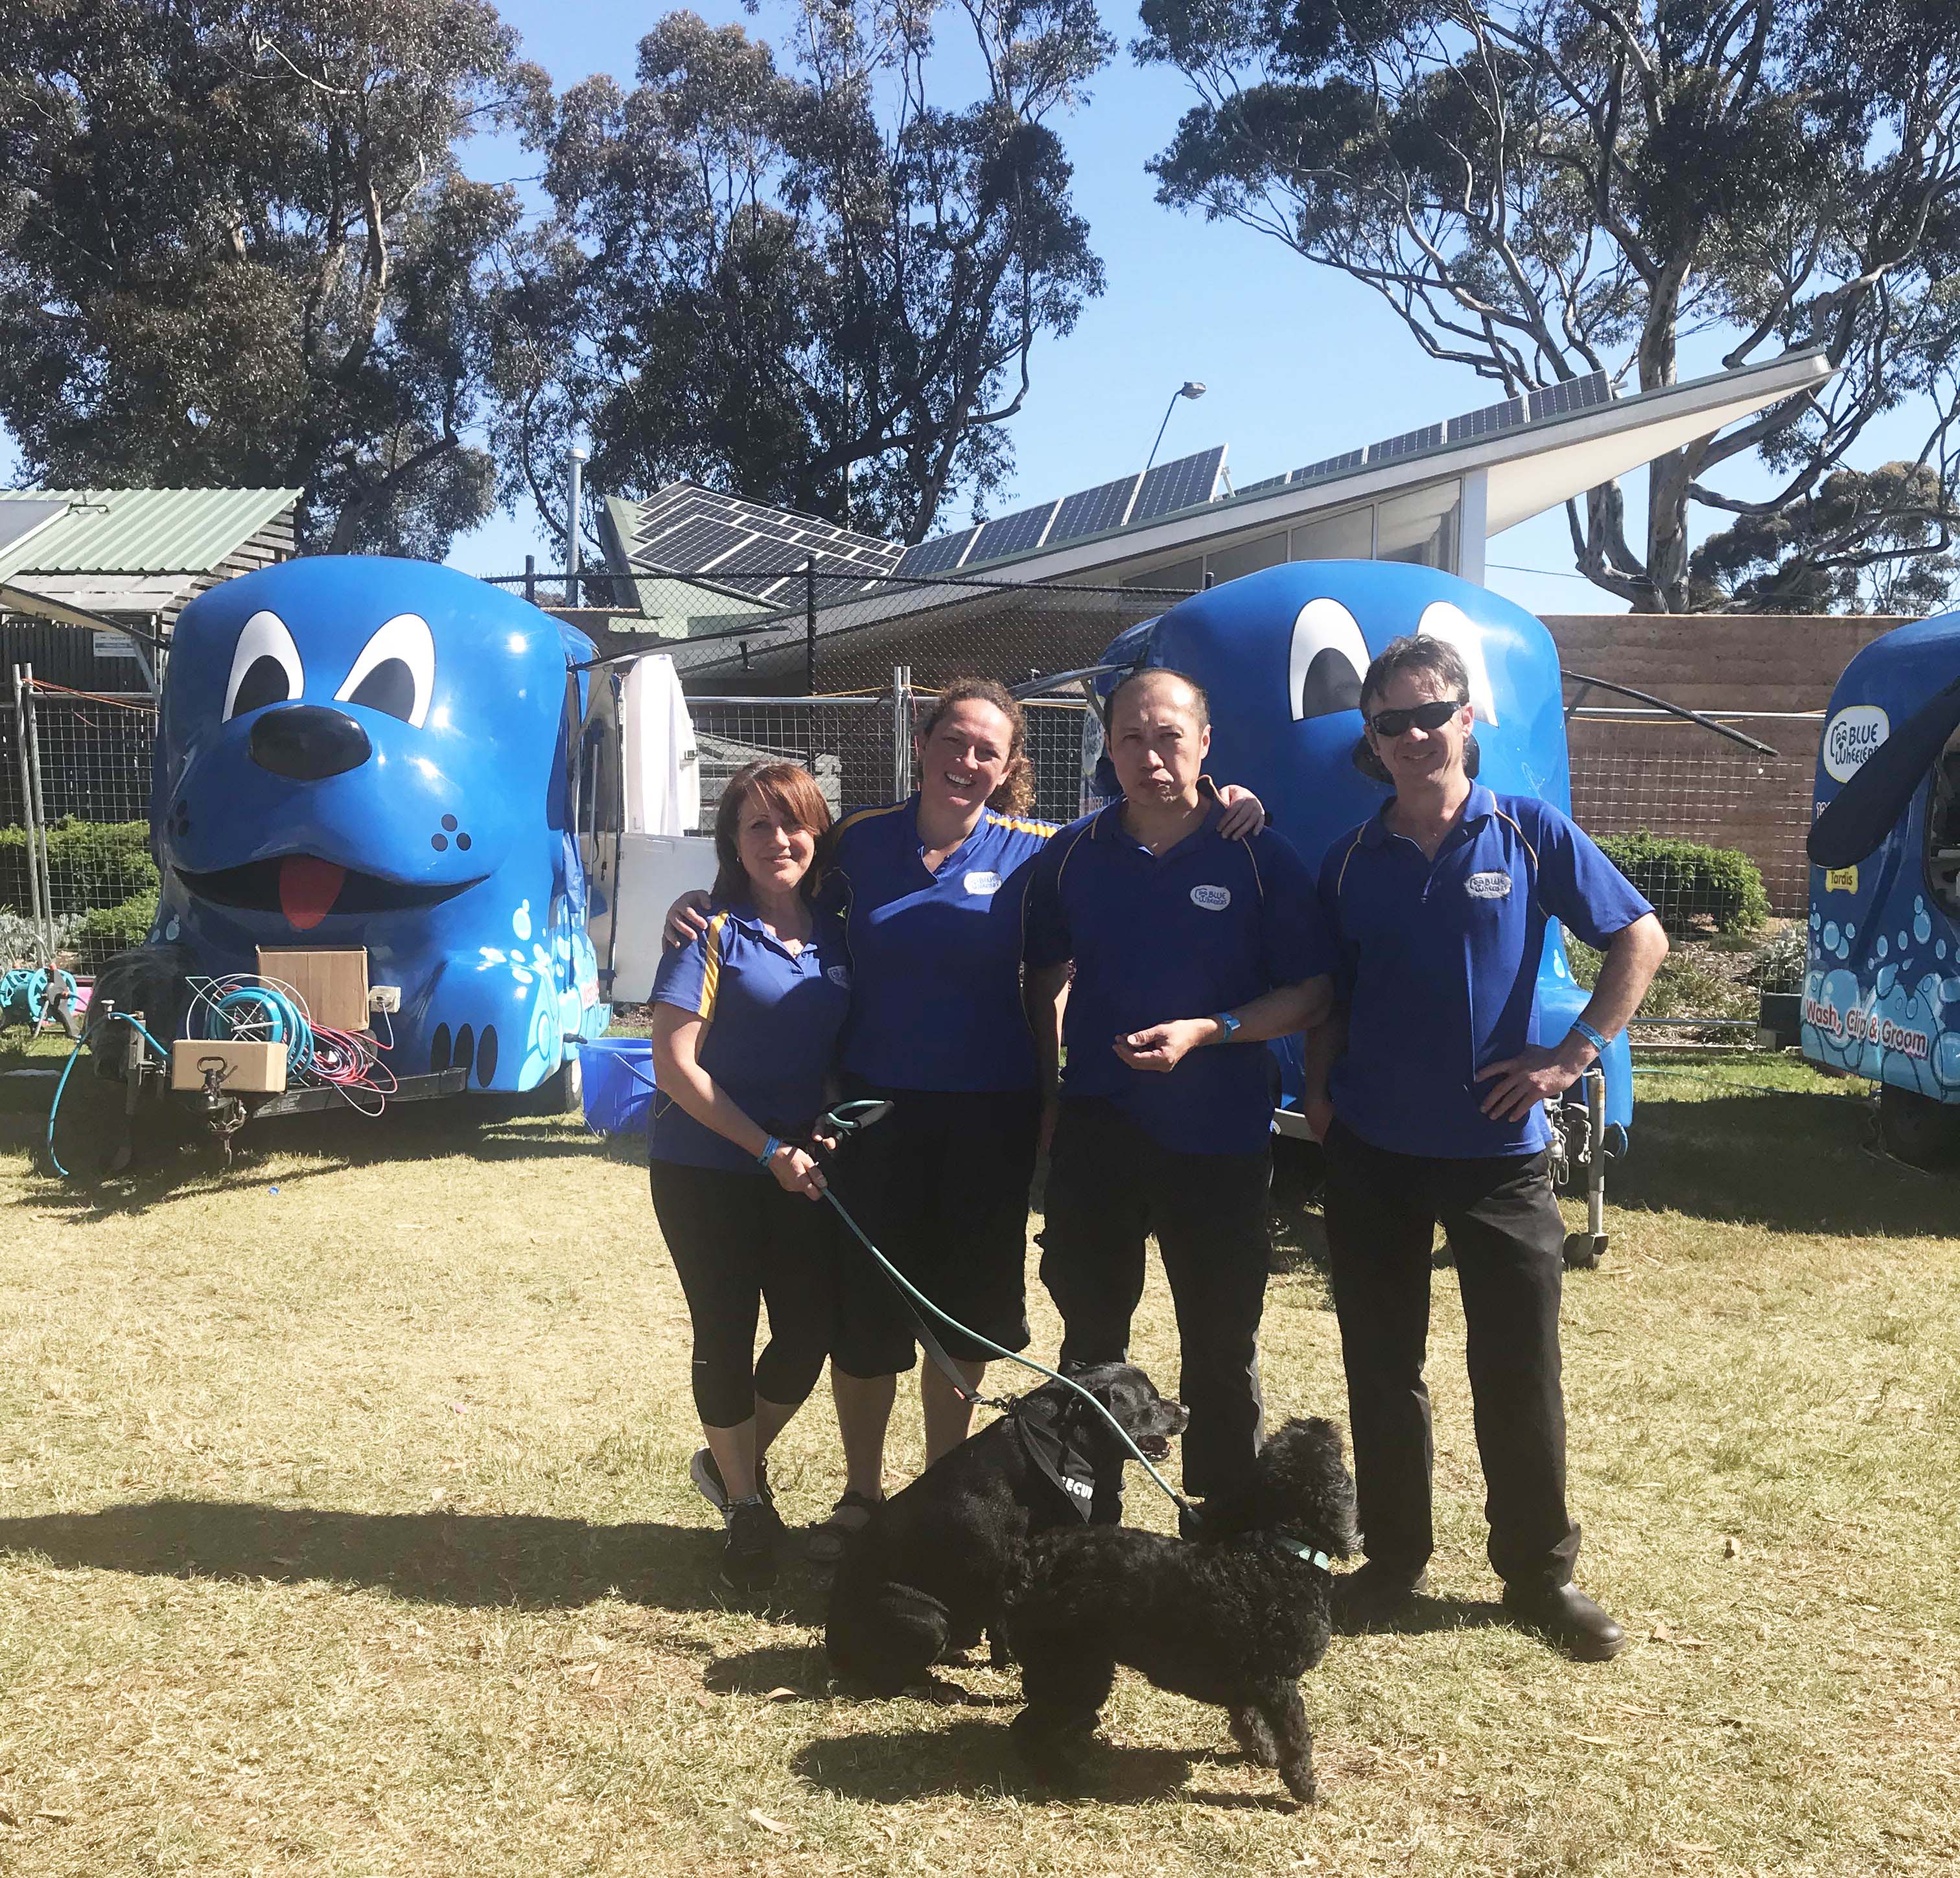 Oscar’s Law , dogs, Dogapalooza , Blue Wheelers, love dogs, dog event, dog events melbourne,, charity, dog charity